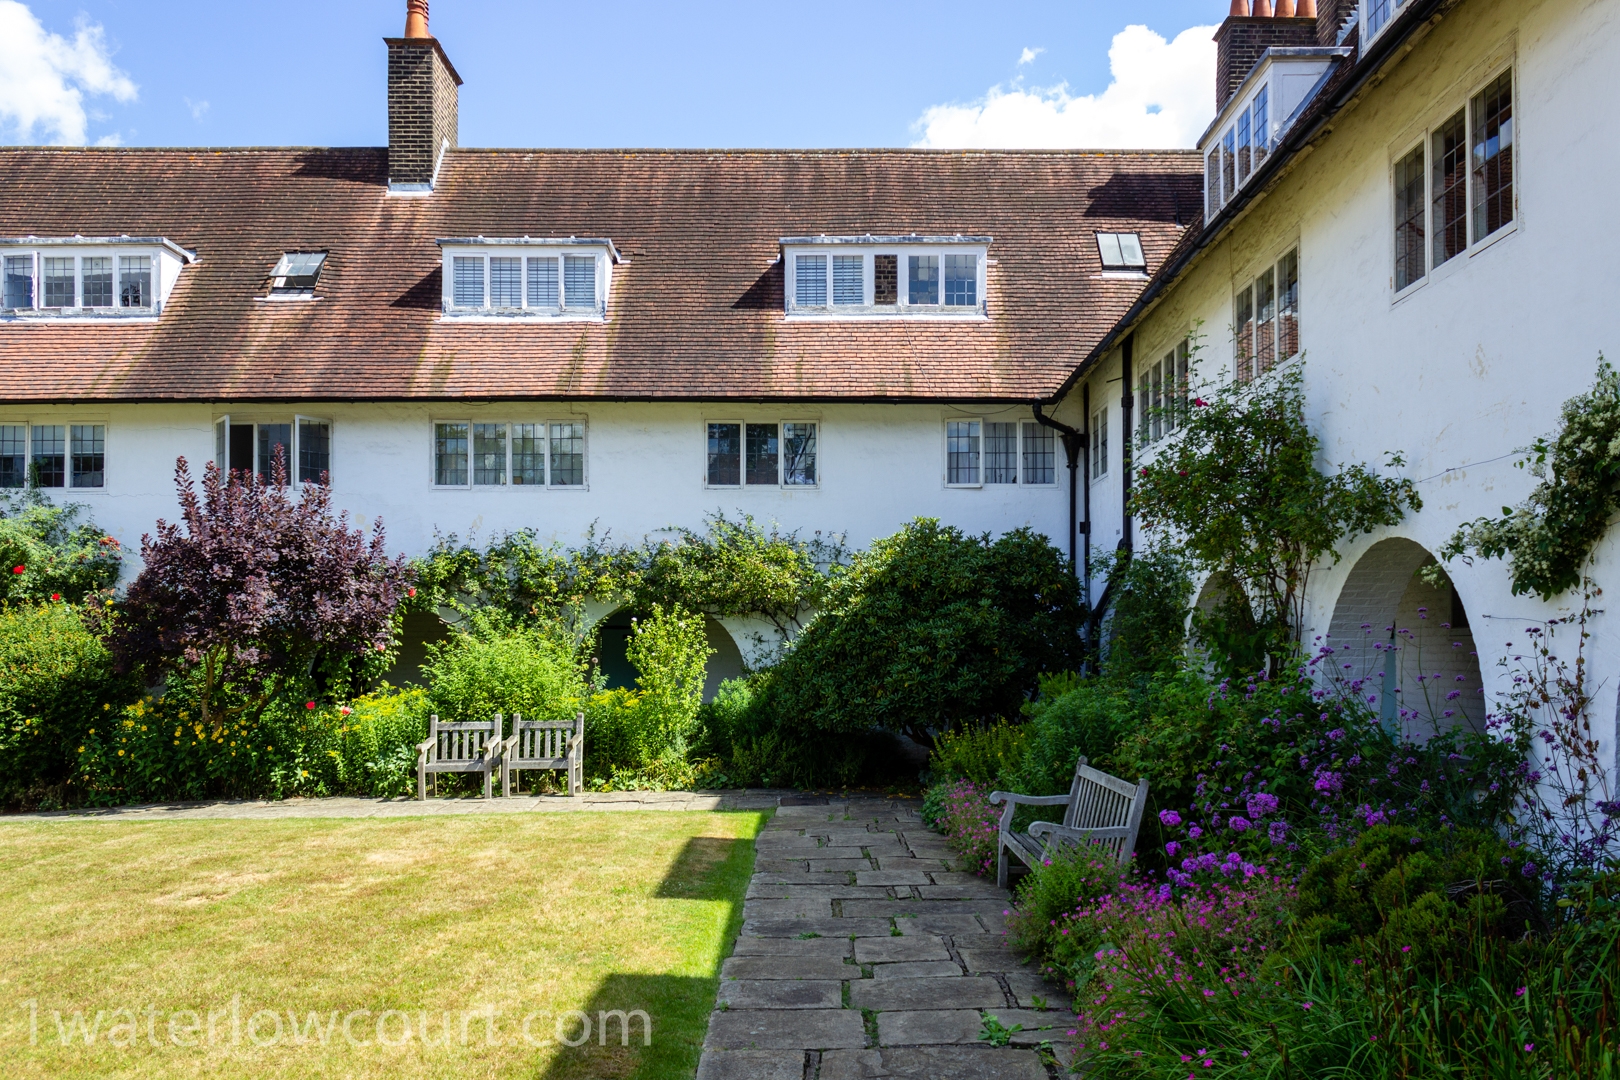 Court yard garden of Waterlow Court, Arts & Crafts Grade II* listed building, M. H. Baillie Scott, 1909. Hampstead Garden Suburb, London NW11 7DT. Flat 1, a one-bedroom, ground-floor flat, is located directly ahead and is for sale. Listed on Rightmove and Zoopla.